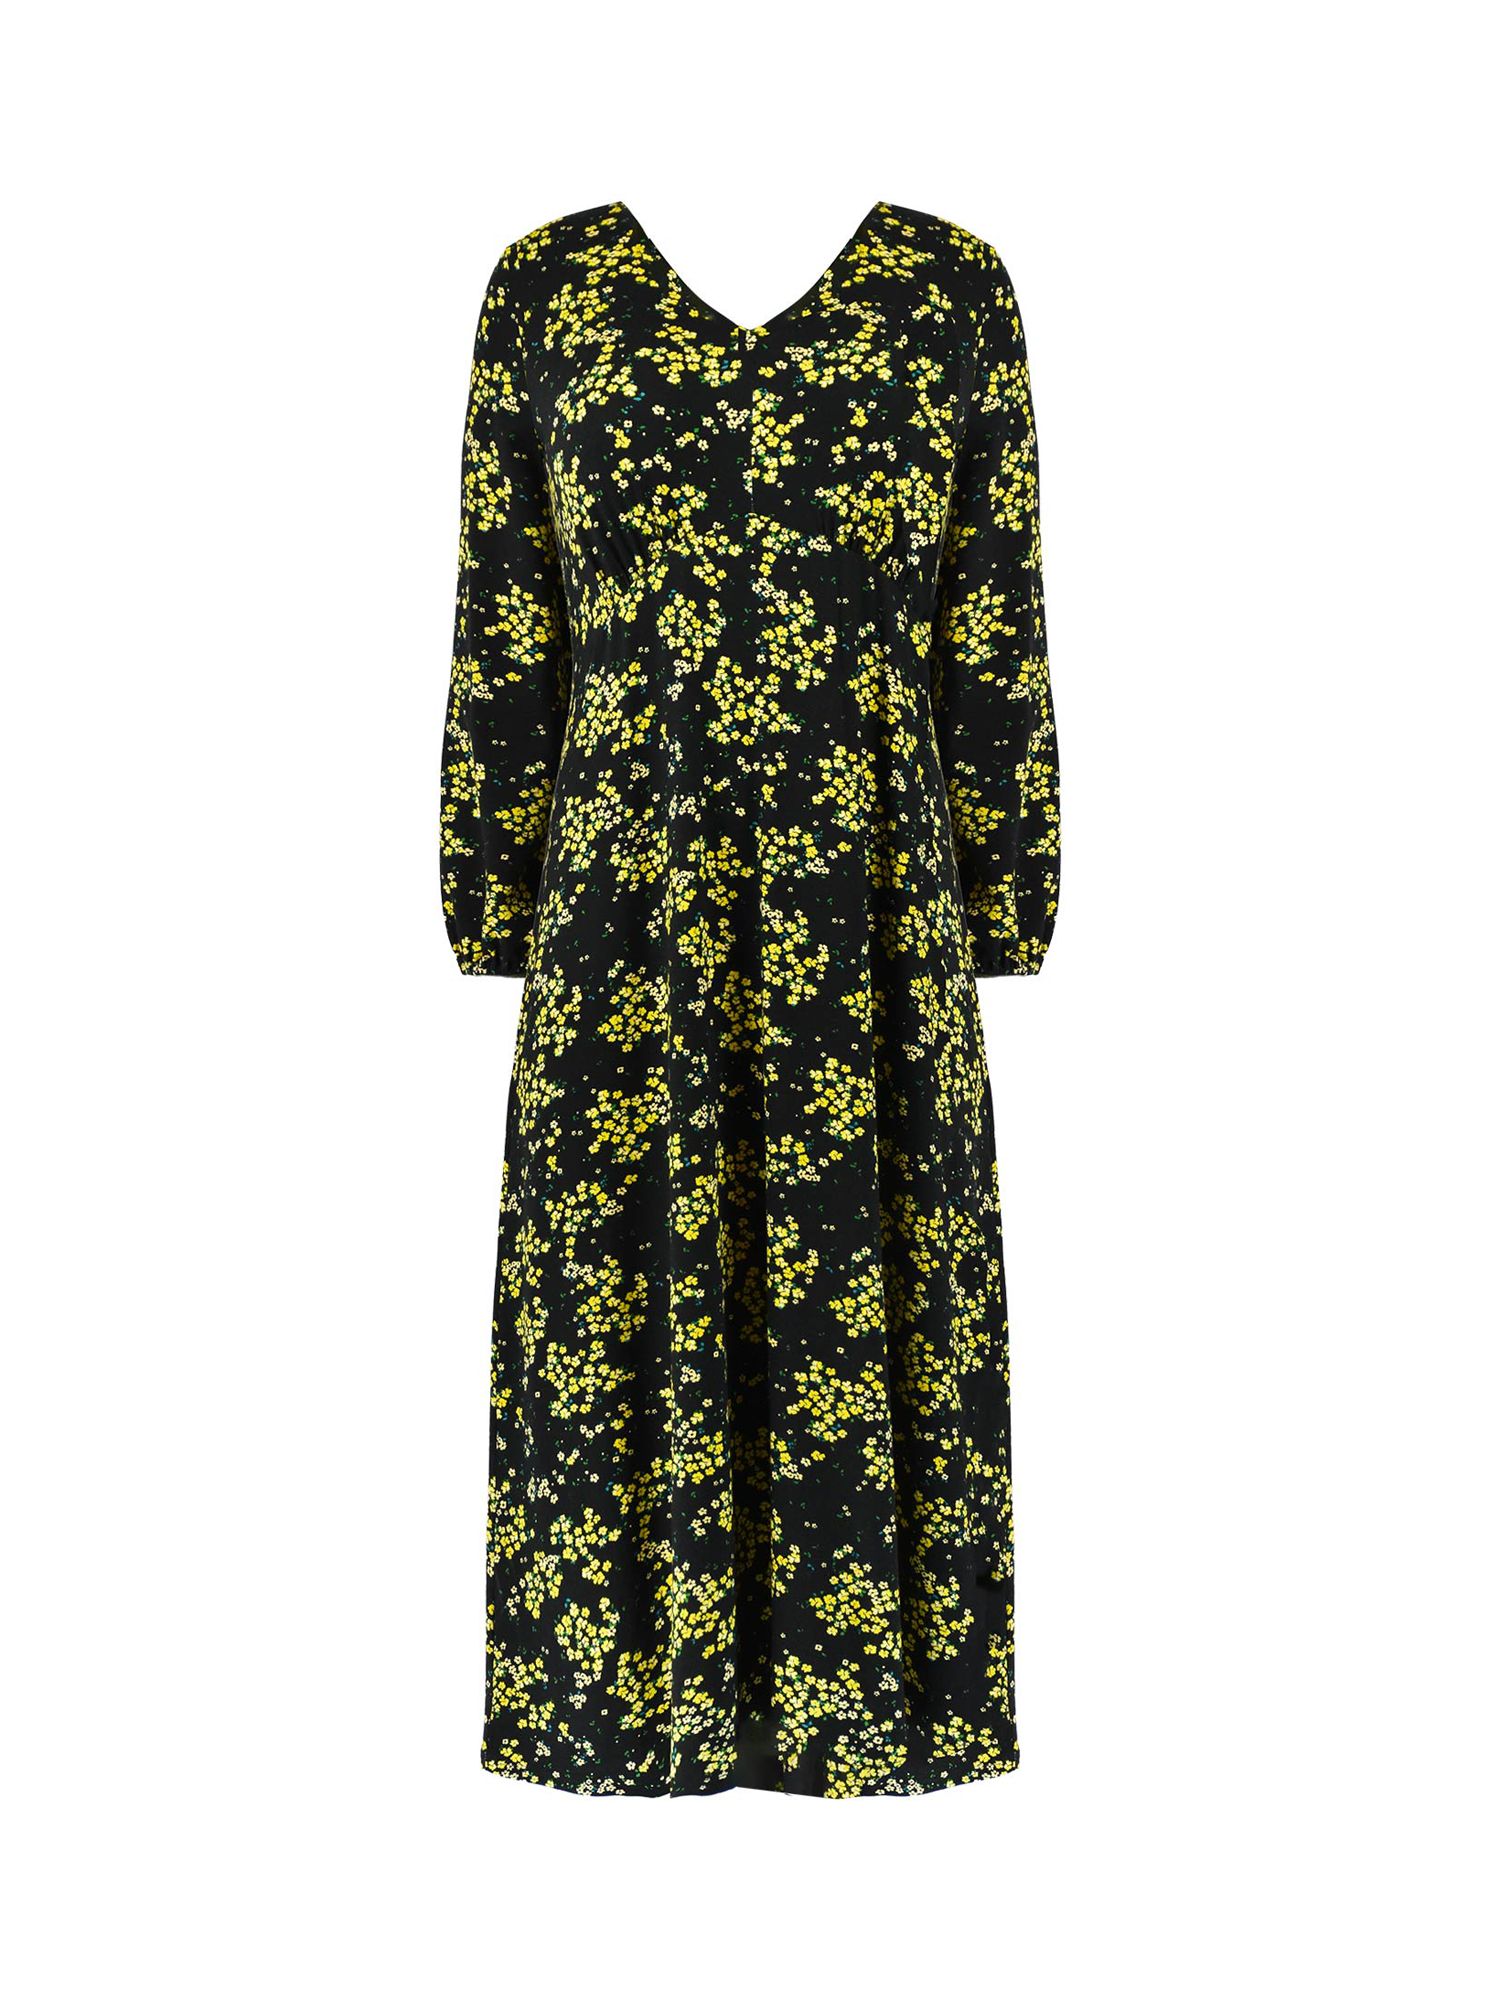 Live Unlimited Curve Ditsy Floral Print Gathered Midi Dress, Yellow/Black, 12